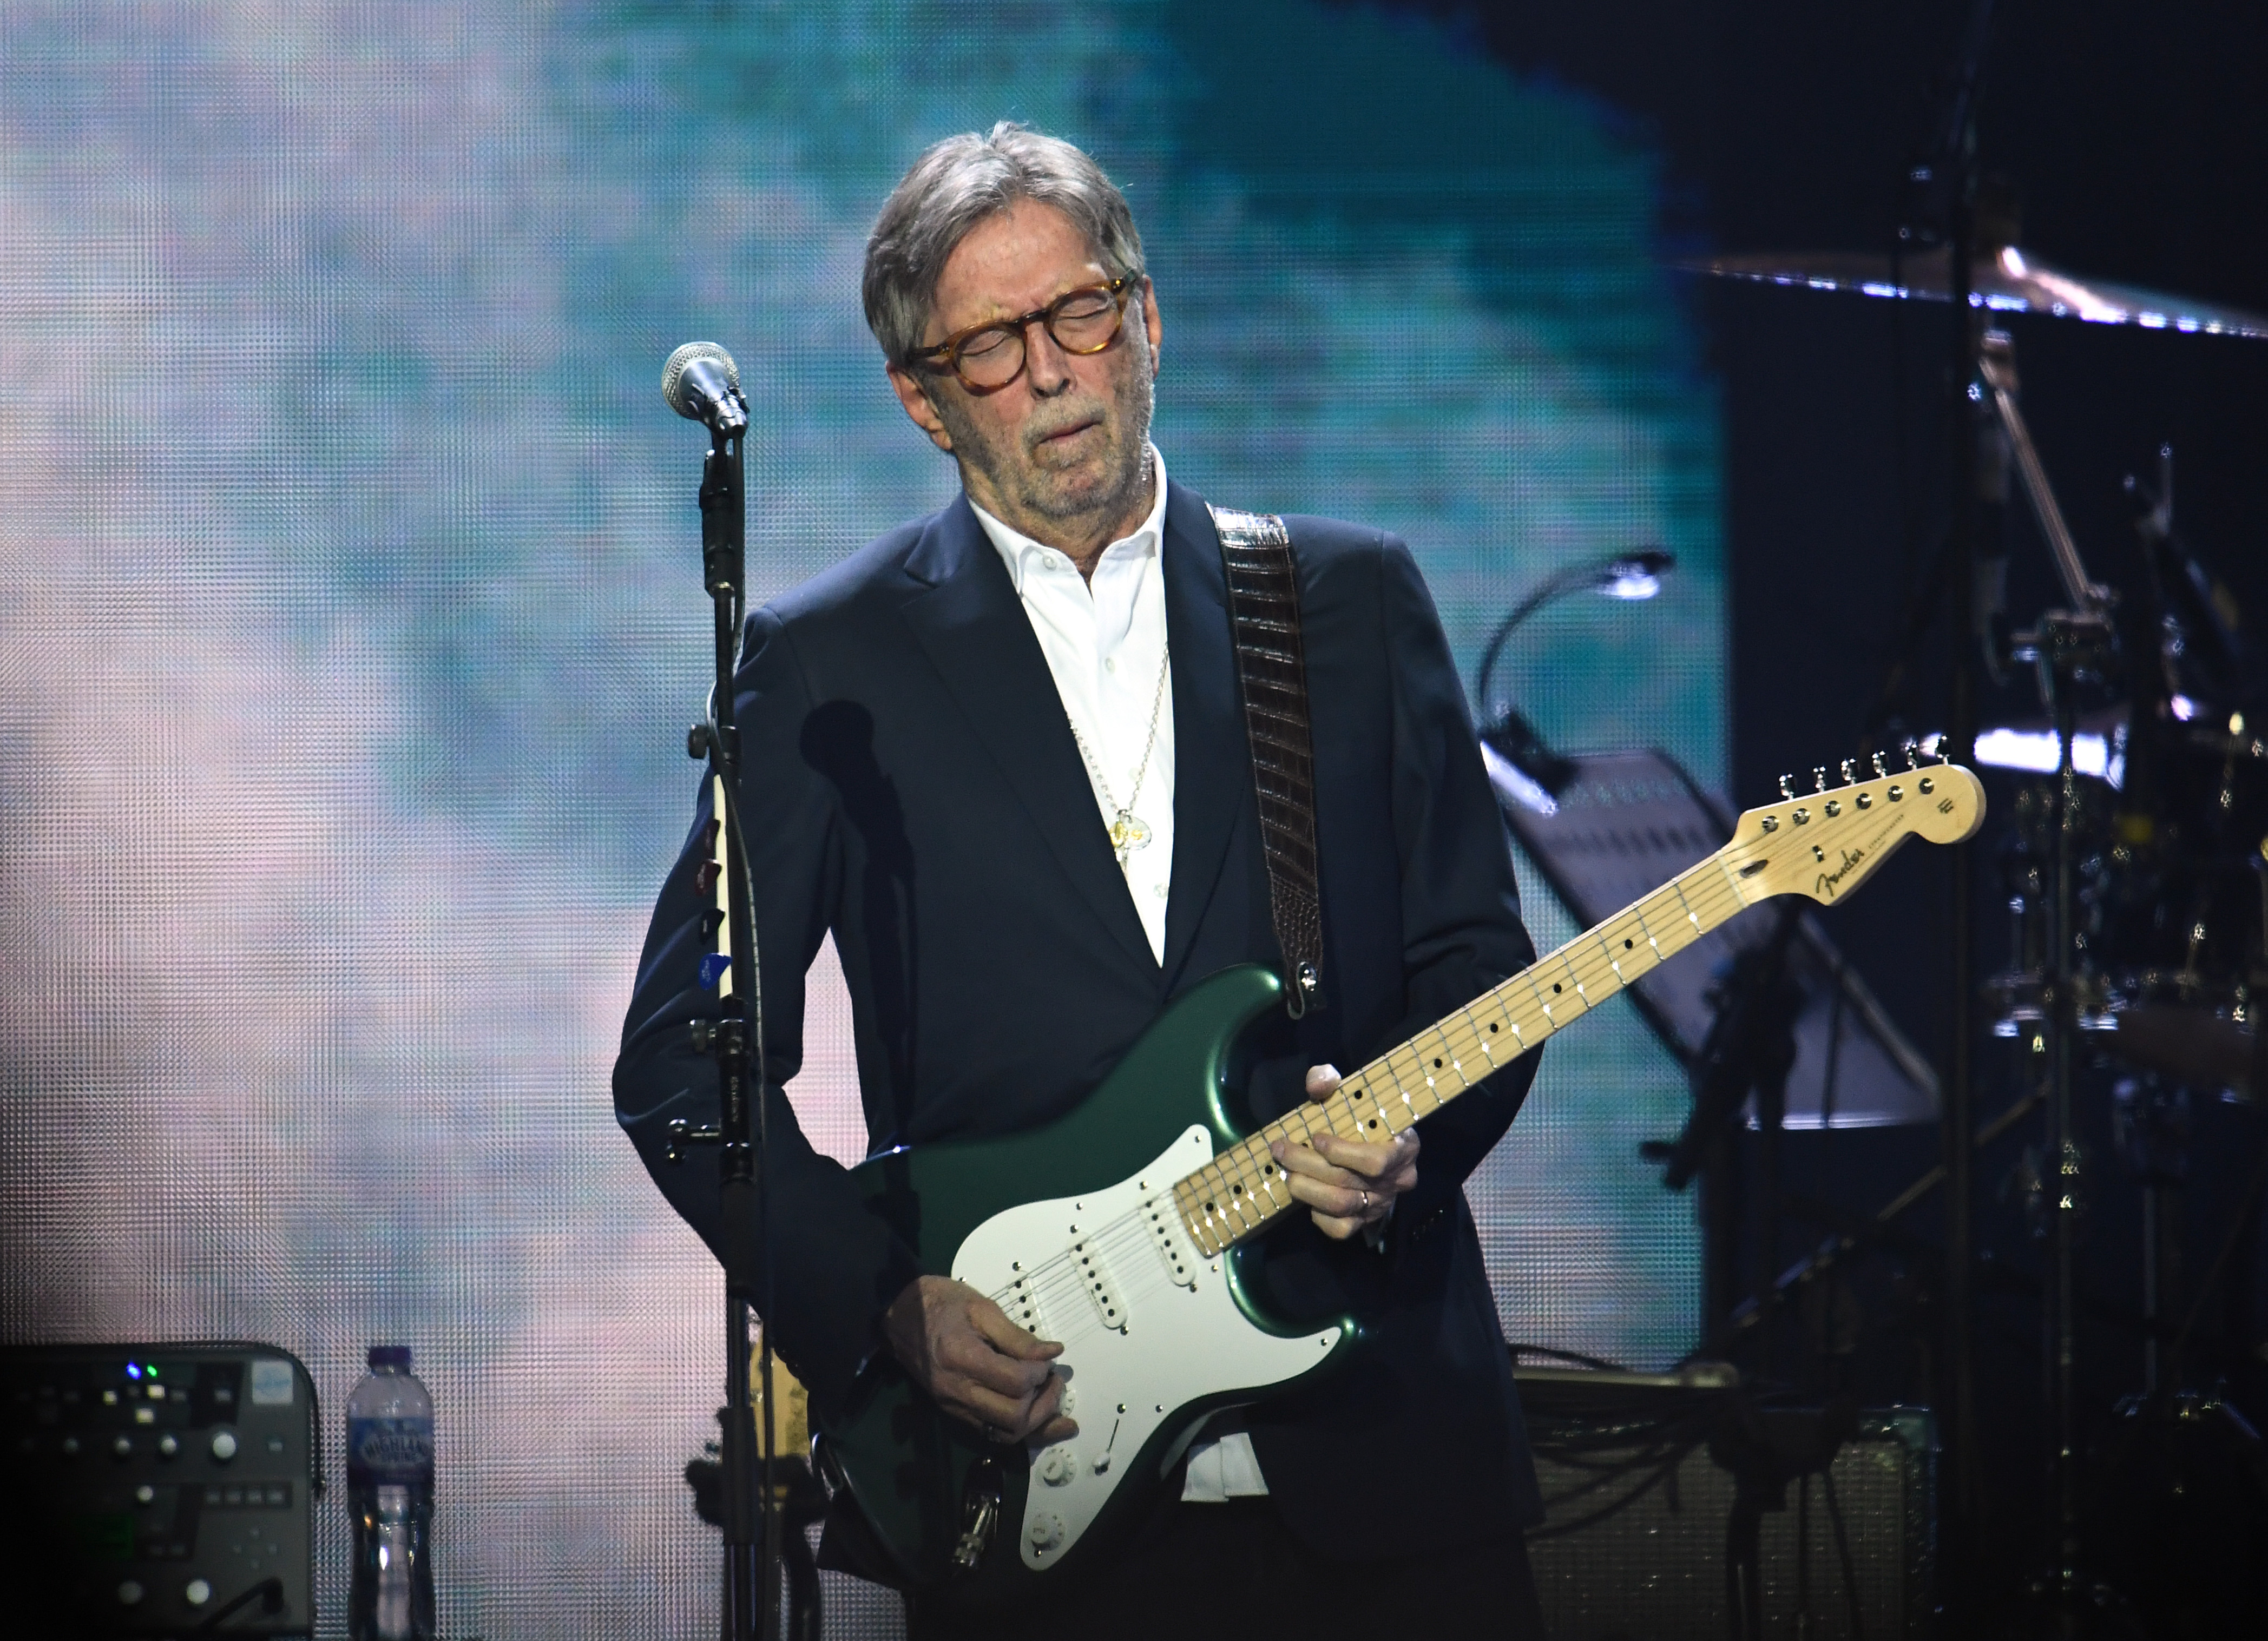 Eric Clapton performs on stage in 2020.